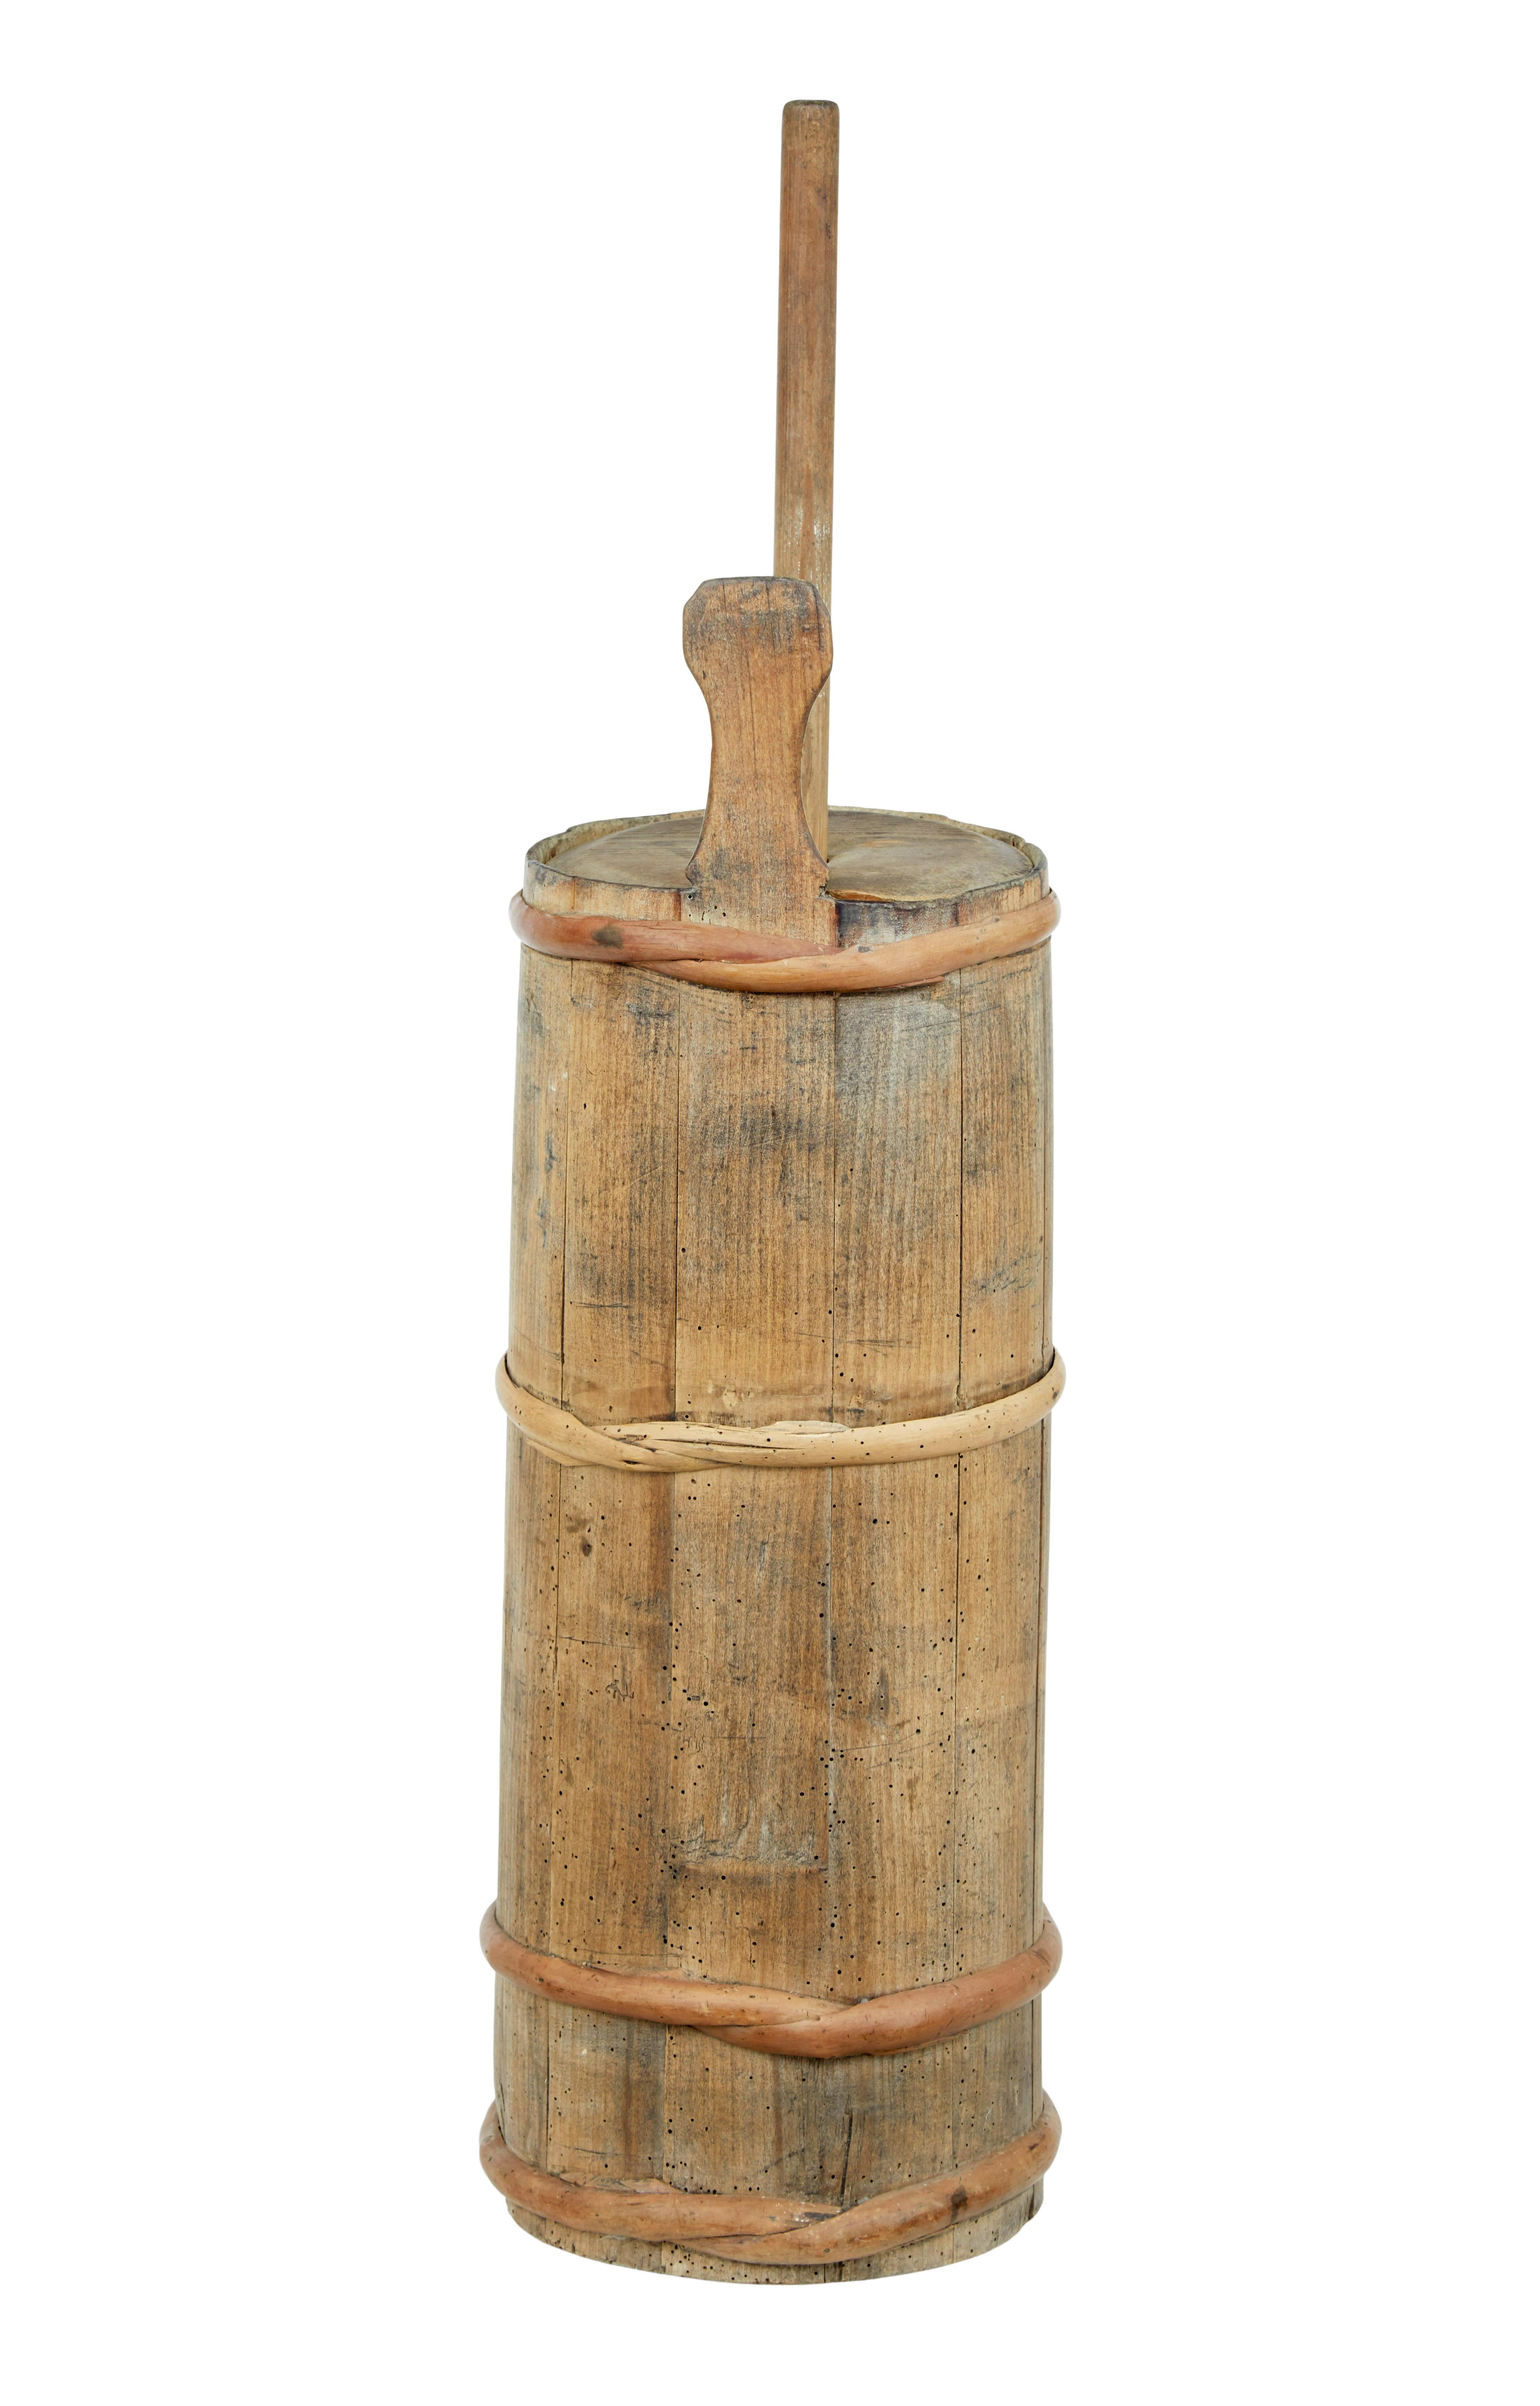 Original condition 19th century swedish butter churn circa 1870.

Rare to find complete with original lid and paddle.  Pine frame held in place by 4 cane straps.

Ideal for use as decorative piece, or for using as a stick umbrella stand.

Evidence